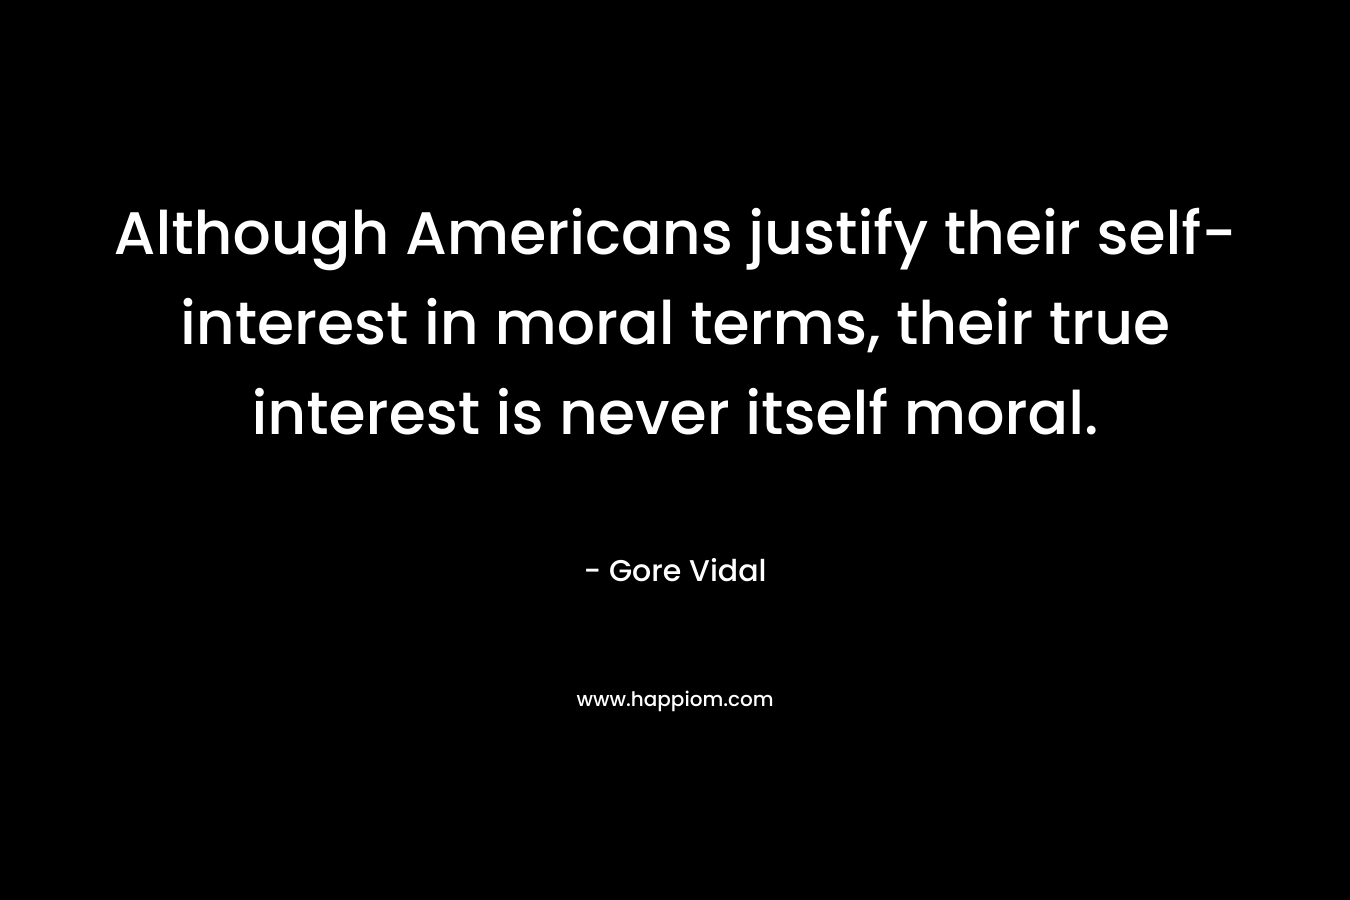 Although Americans justify their self-interest in moral terms, their true interest is never itself moral.